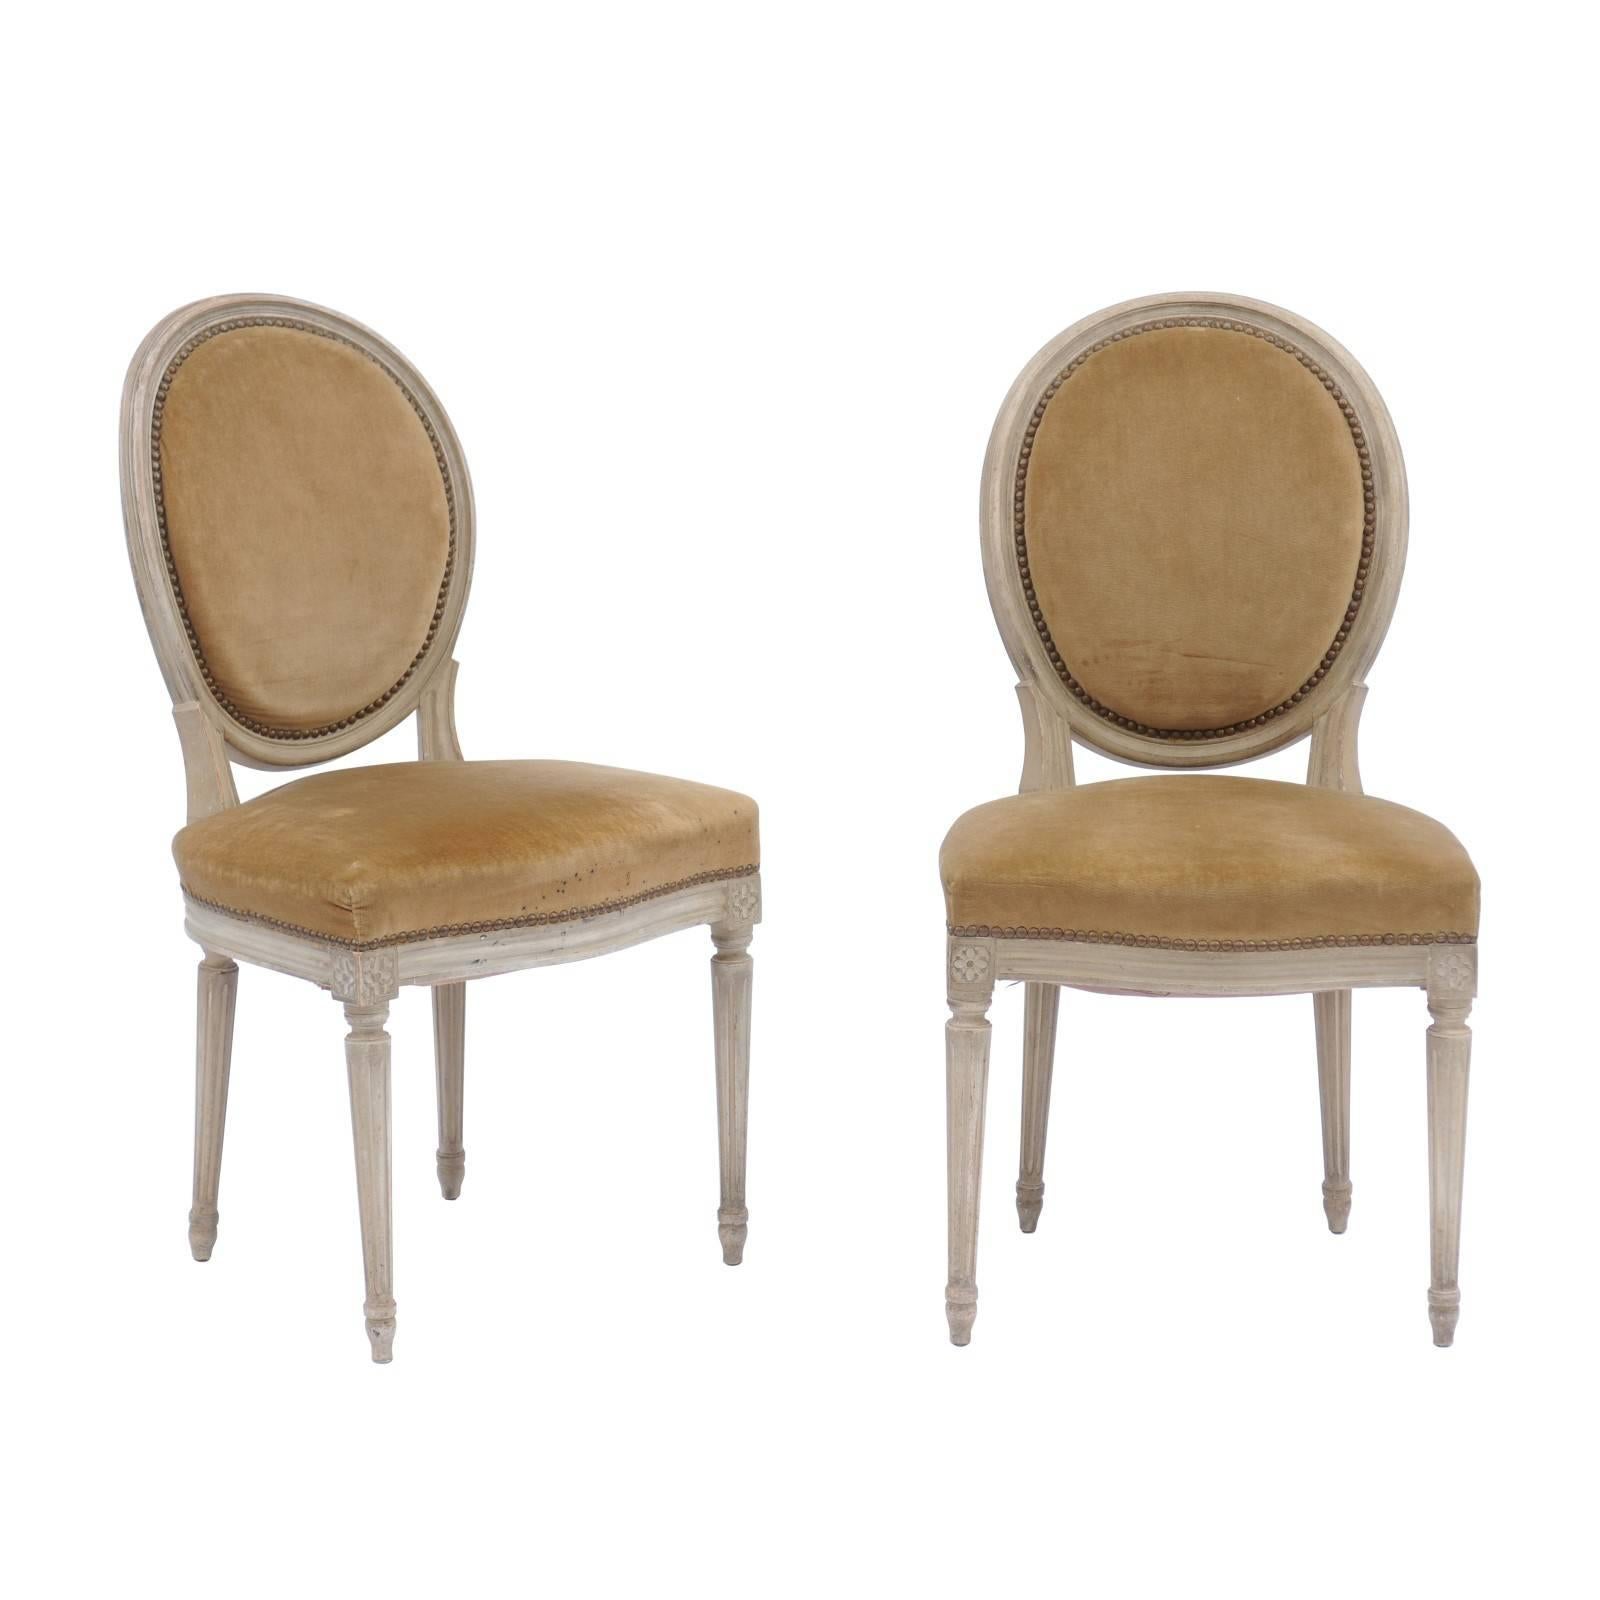 Pair of French Louis XVI Style Painted Wood Side Chairs with Original Upholstery